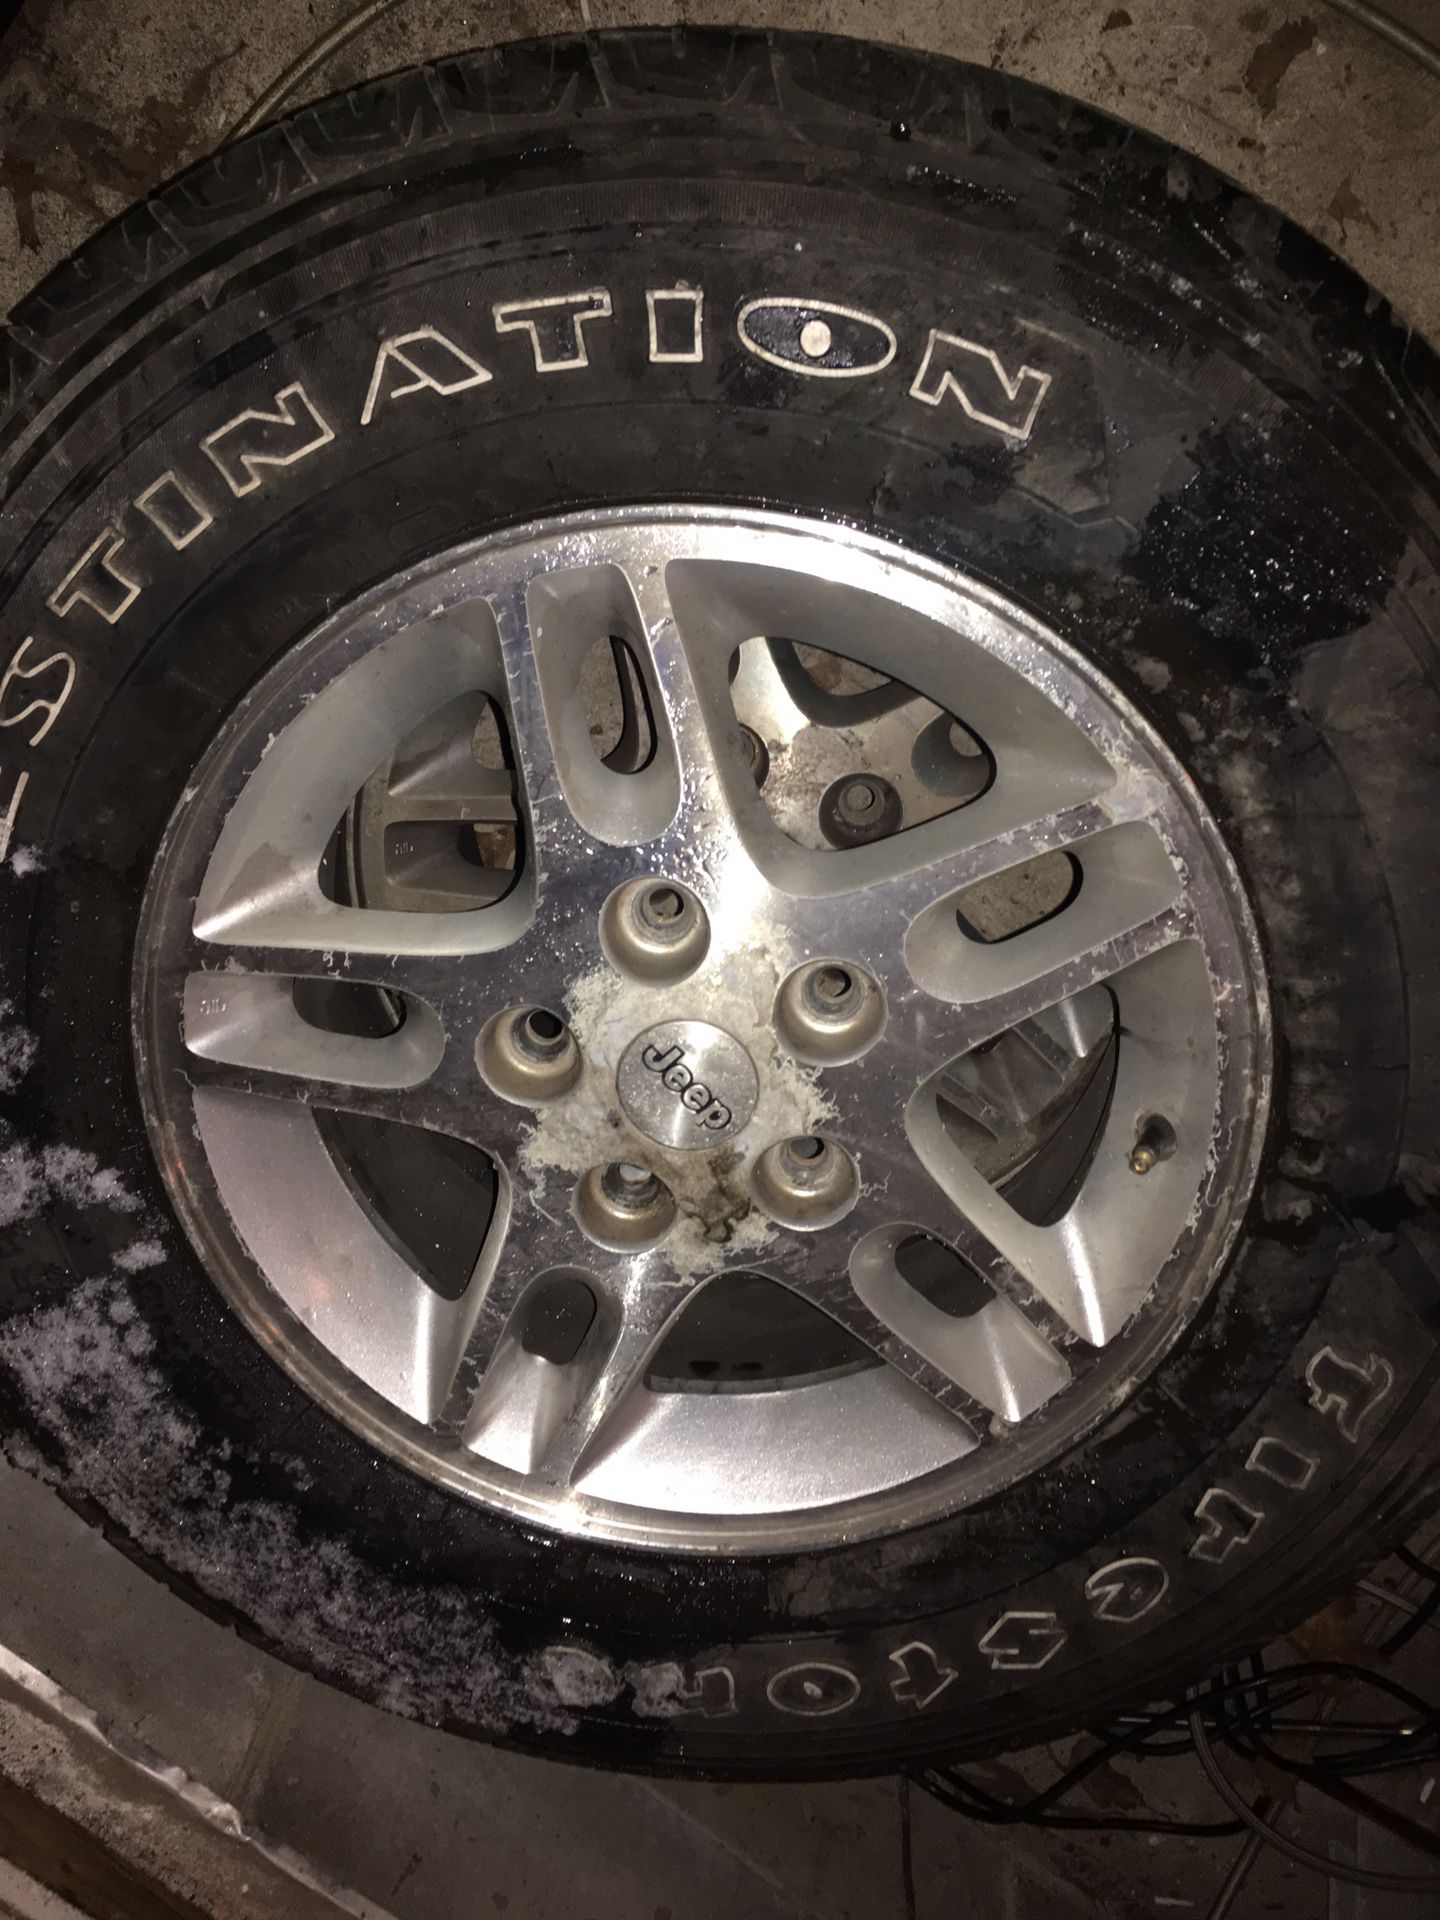 2000 Jeep Grand Cherokee rims and tires 5 bolts